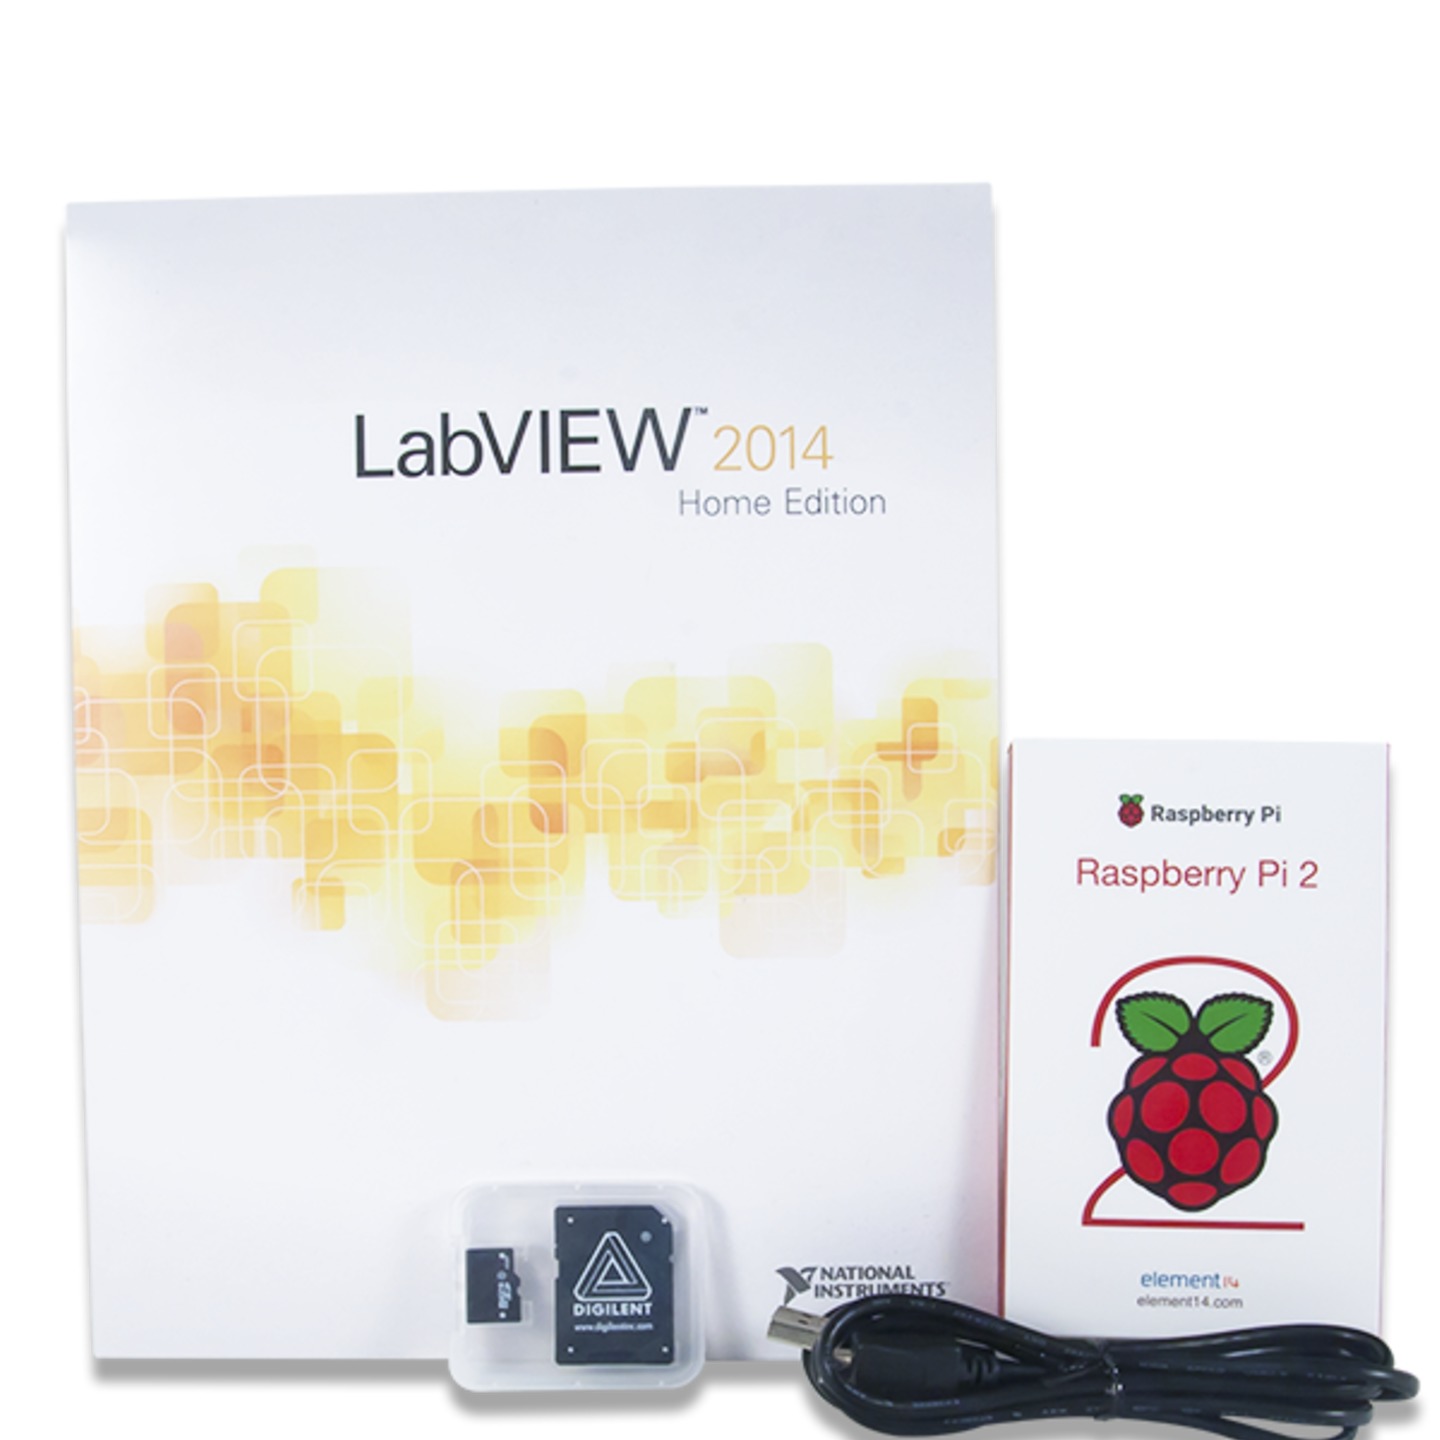 LabVIEW Physical Computing Kit for Raspberry Pi 2